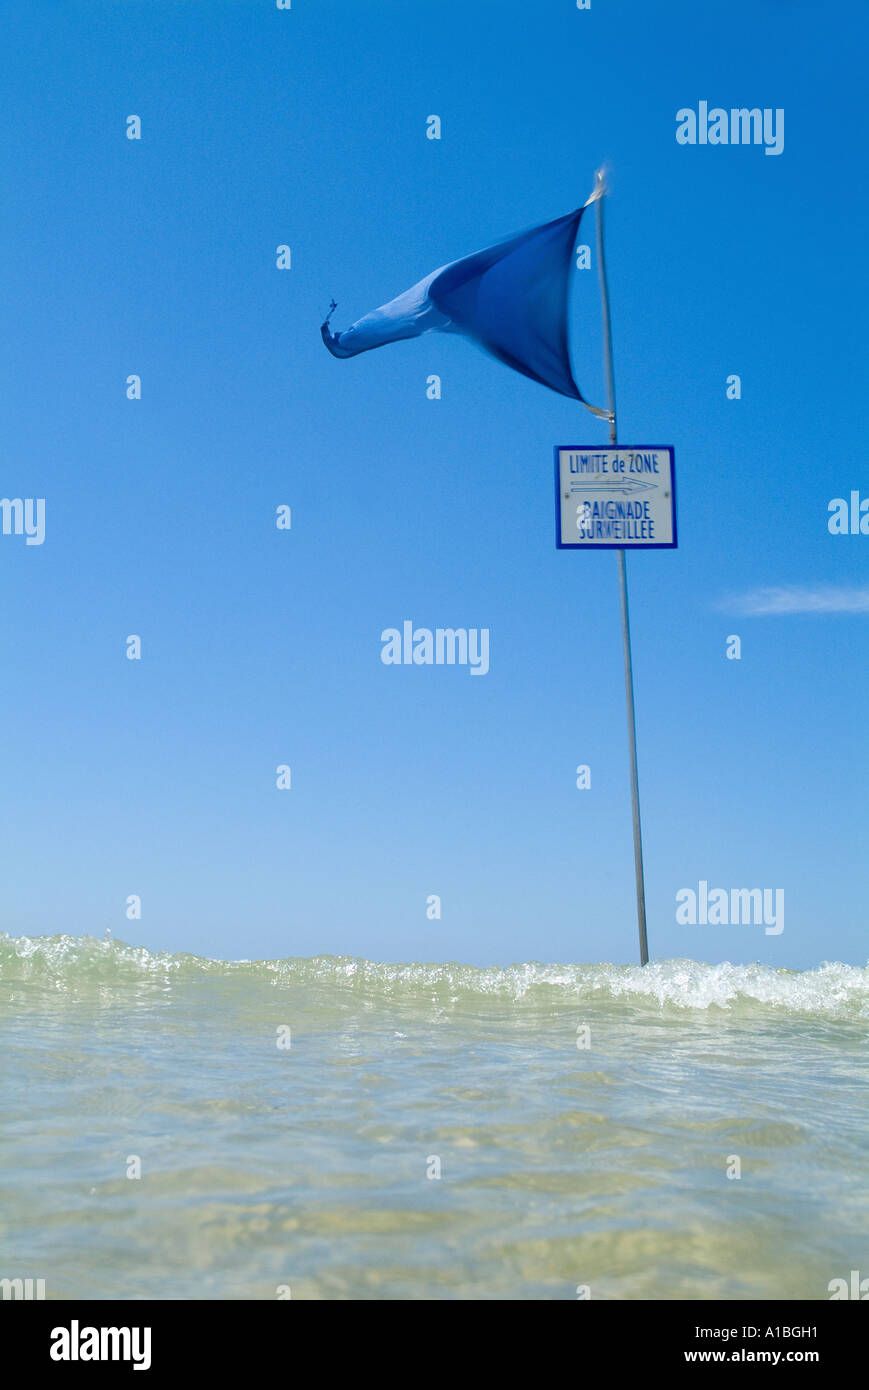 Bathing Oversee Limit Flag At Biscarrosse Beach In France Aquitaine Stock Photo